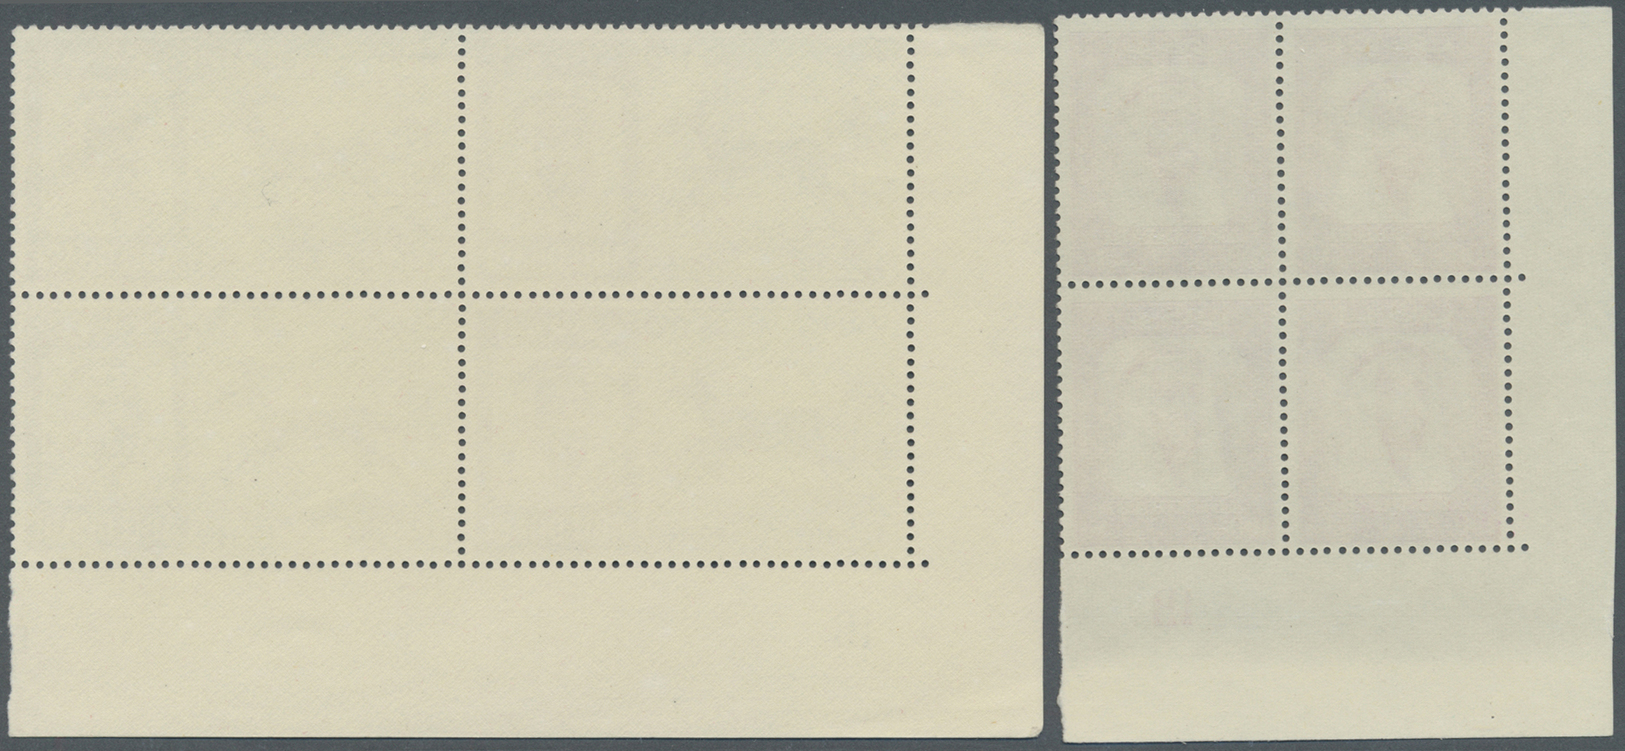 ** Abu Dhabi: 1967, Definitives, 100f. To 1d., Five Top Values Each As Plate Block From The Lower Left Corner Of The She - Abu Dhabi